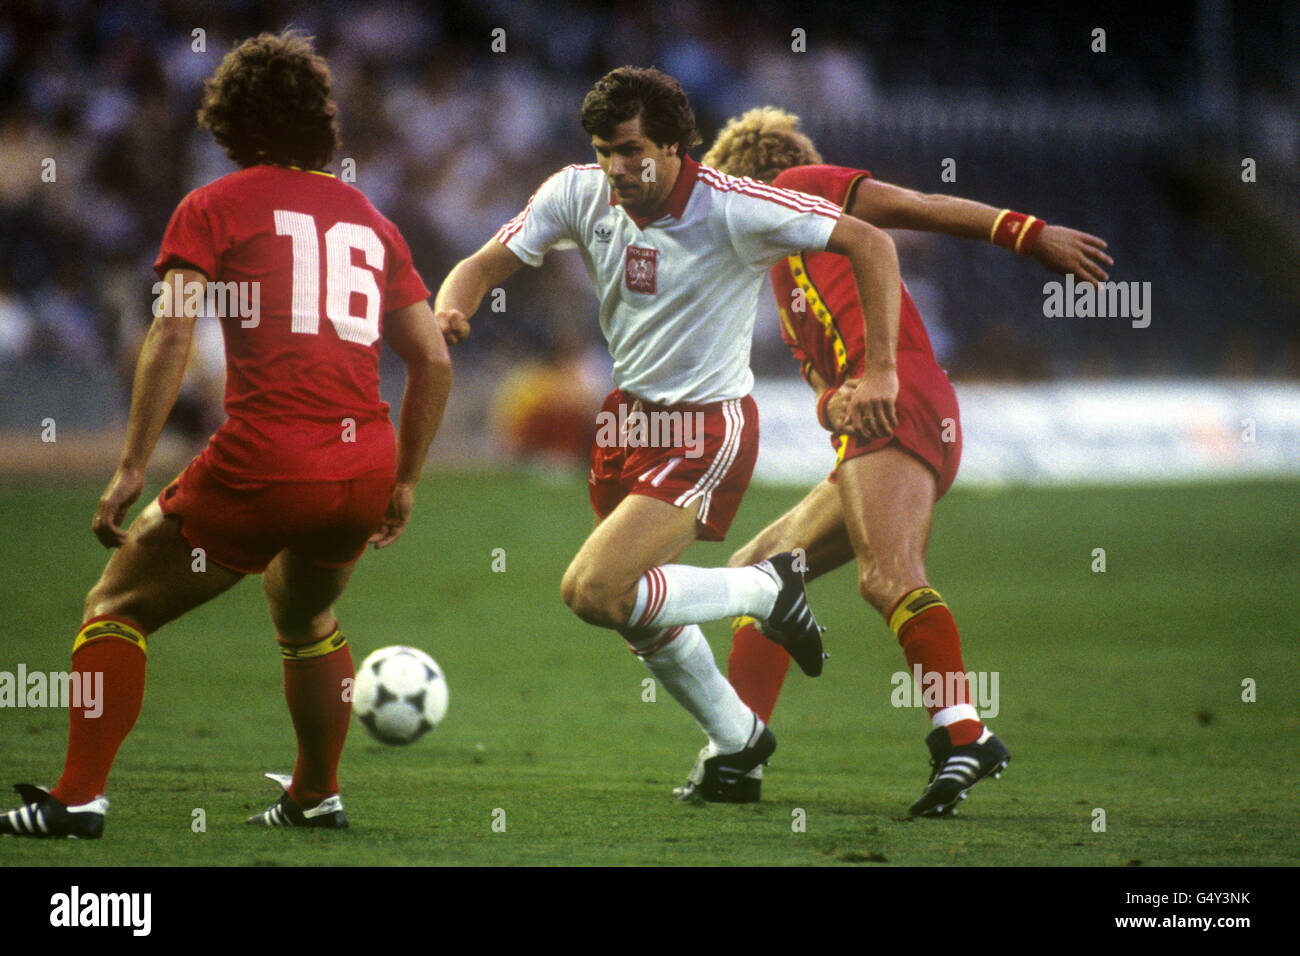 Soccer - FIFA World Cup Spain 82 - Second Round - Group A - Poland v Belgium - Camp Nou, Barcelona. Poland's Wlodimierz Smolarek gets between Belgium's Gerard Plessers (l) and Ludo Coeck (r). Stock Photo